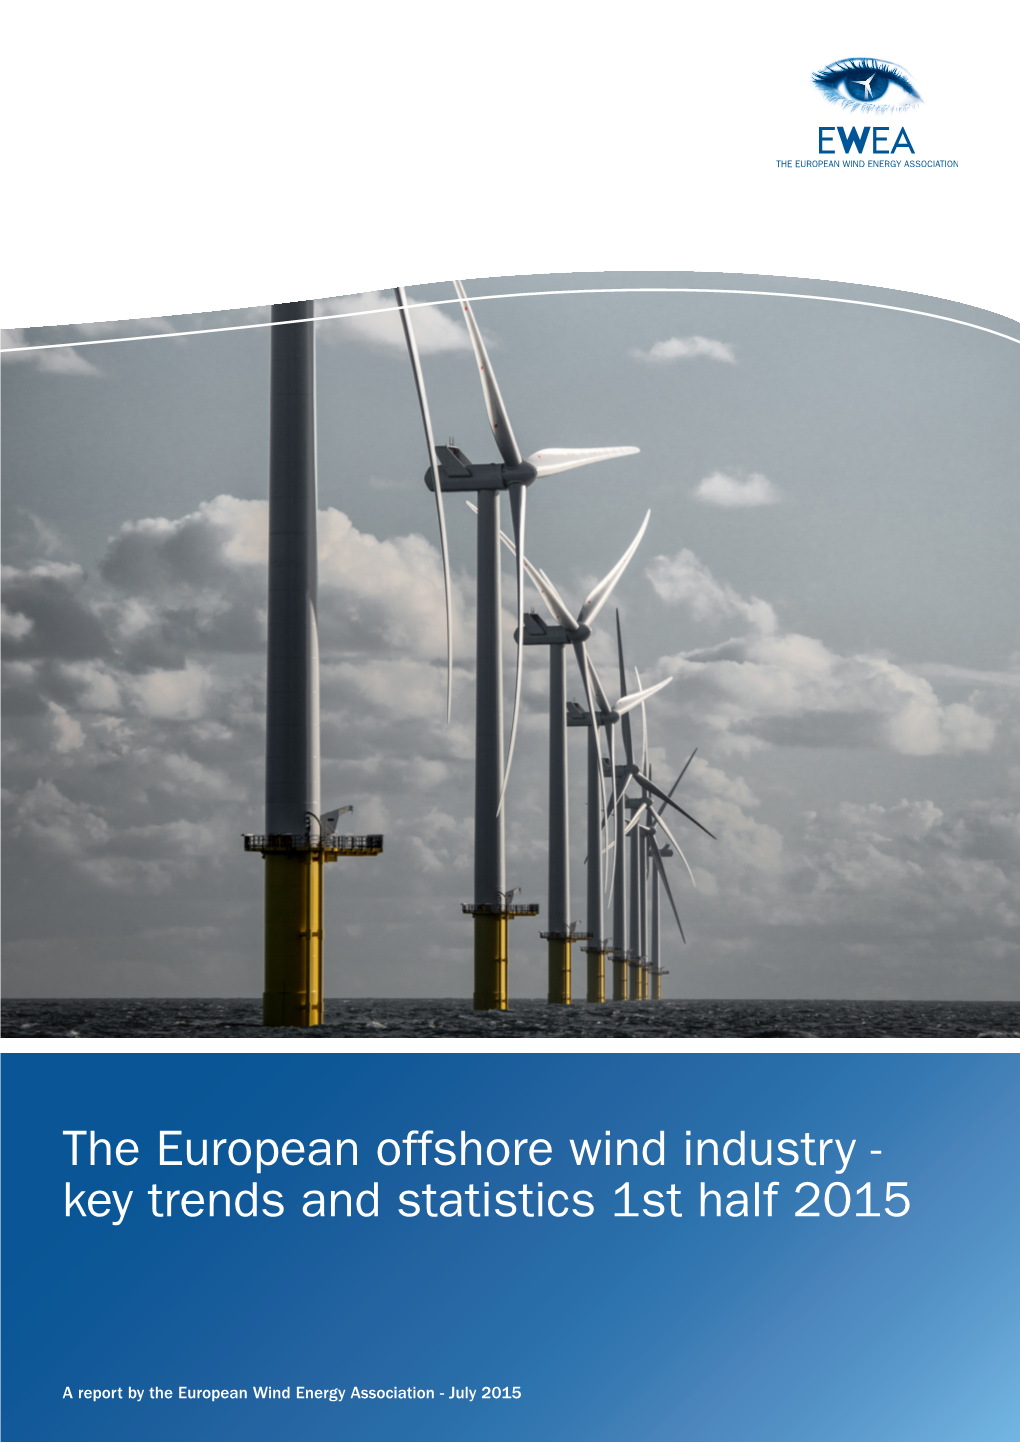 The European Offshore Wind Industry - Key Trends and Statistics 1St Half 2015